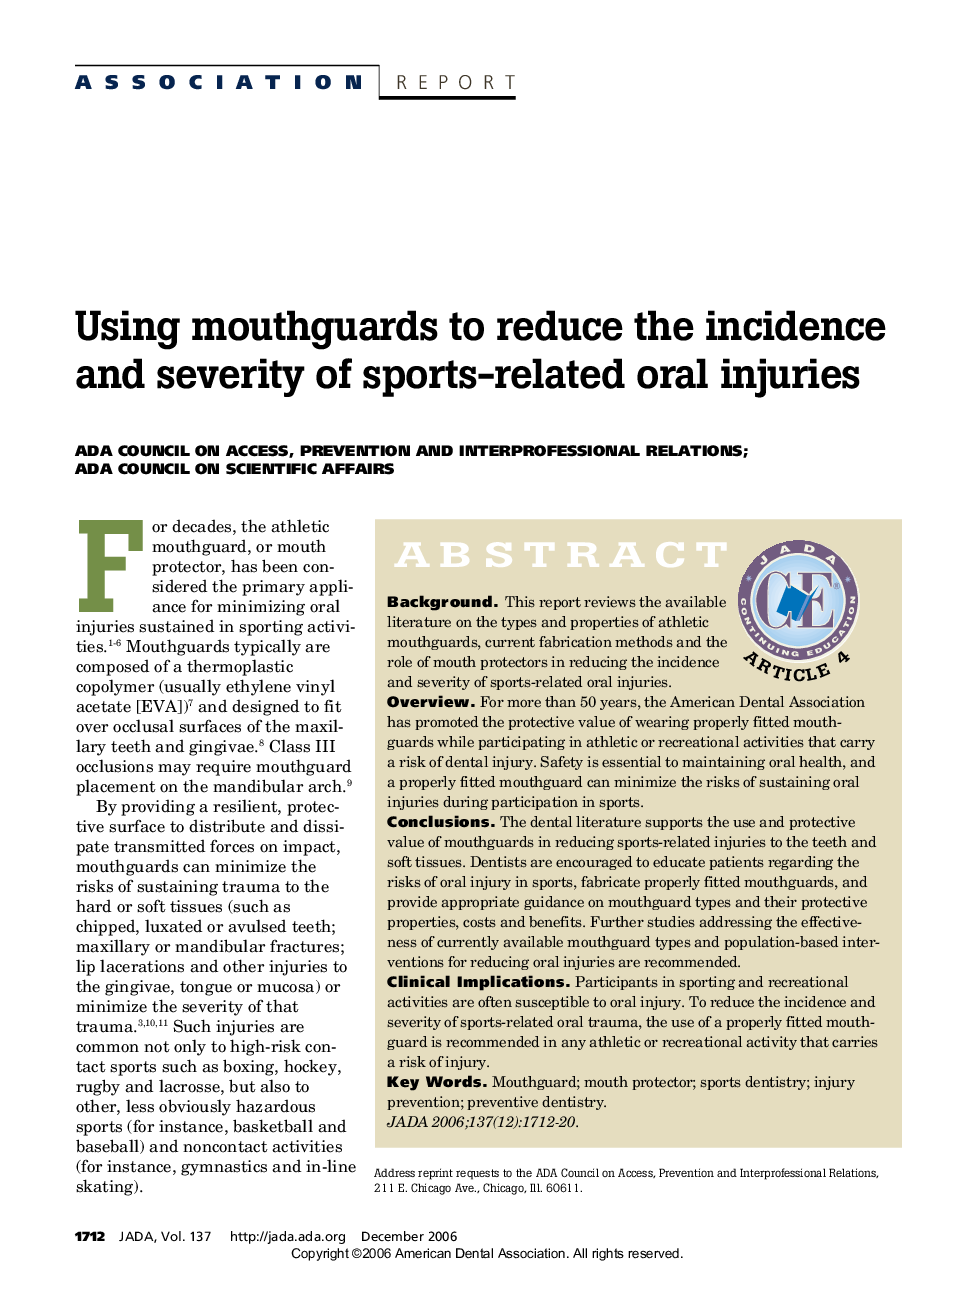 Using mouthguards to reduce the incidence and severity of sports-related oral injuries 